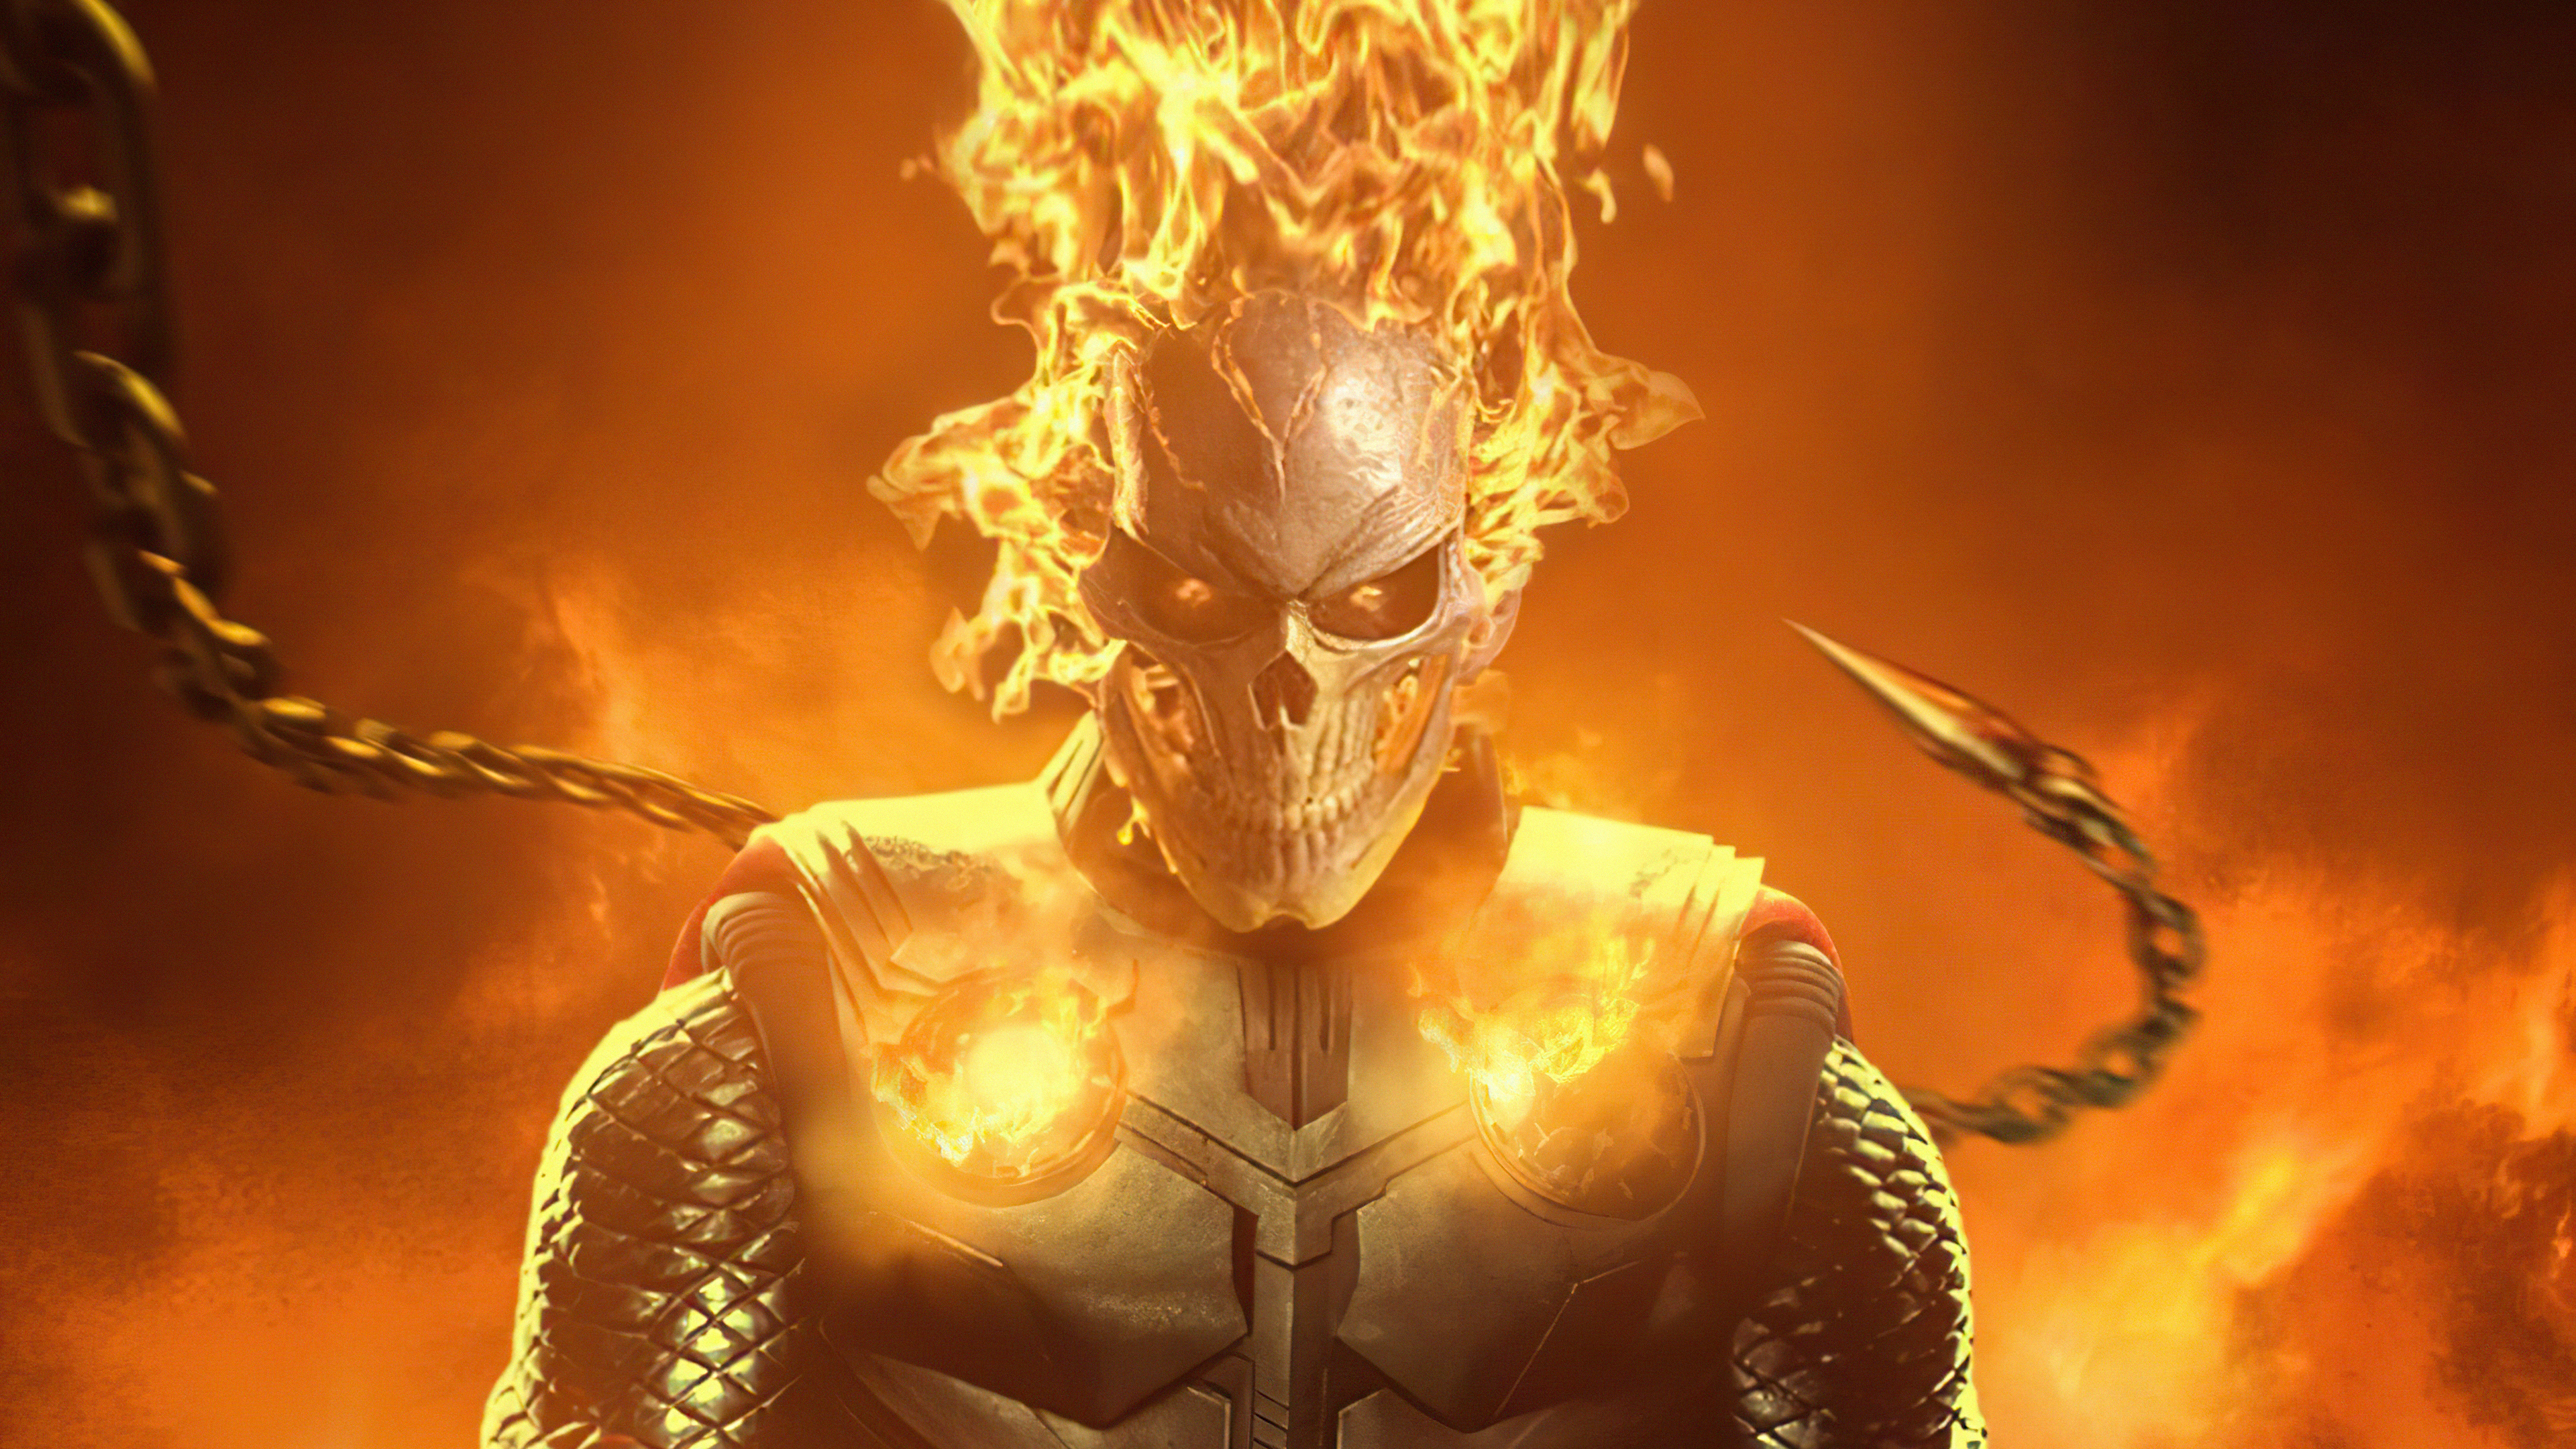 Ghost Rider wallpaper by ____S - Download on ZEDGE™ | 3797 | Ghost rider, Ghost  rider wallpaper, Ghost rider photos